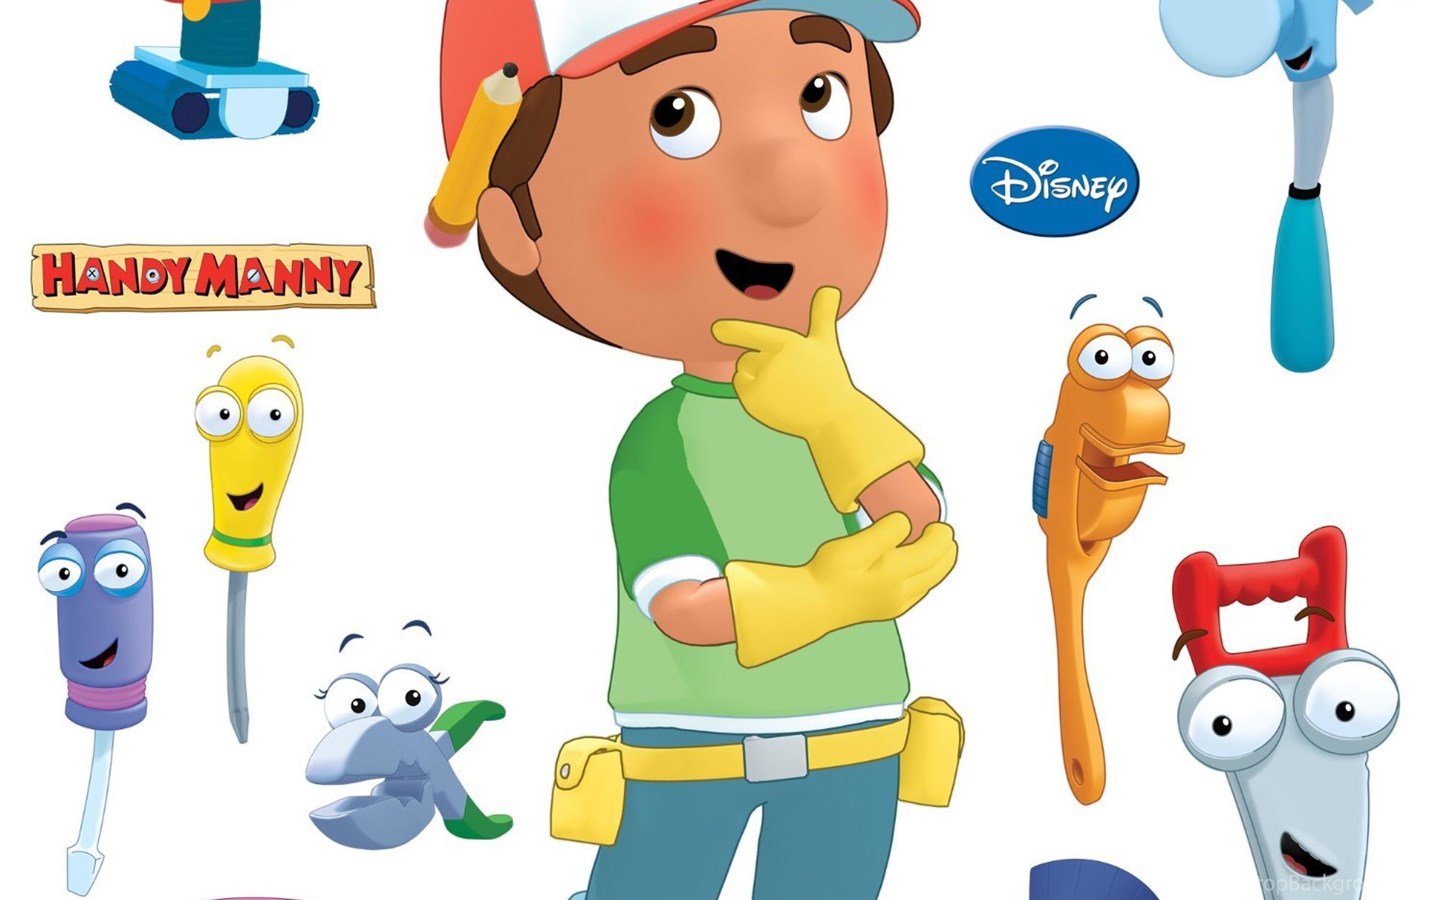 Download Fathead 74 74012 Wall Decal, Handy Manny, Wall Banners Amazon Cana...